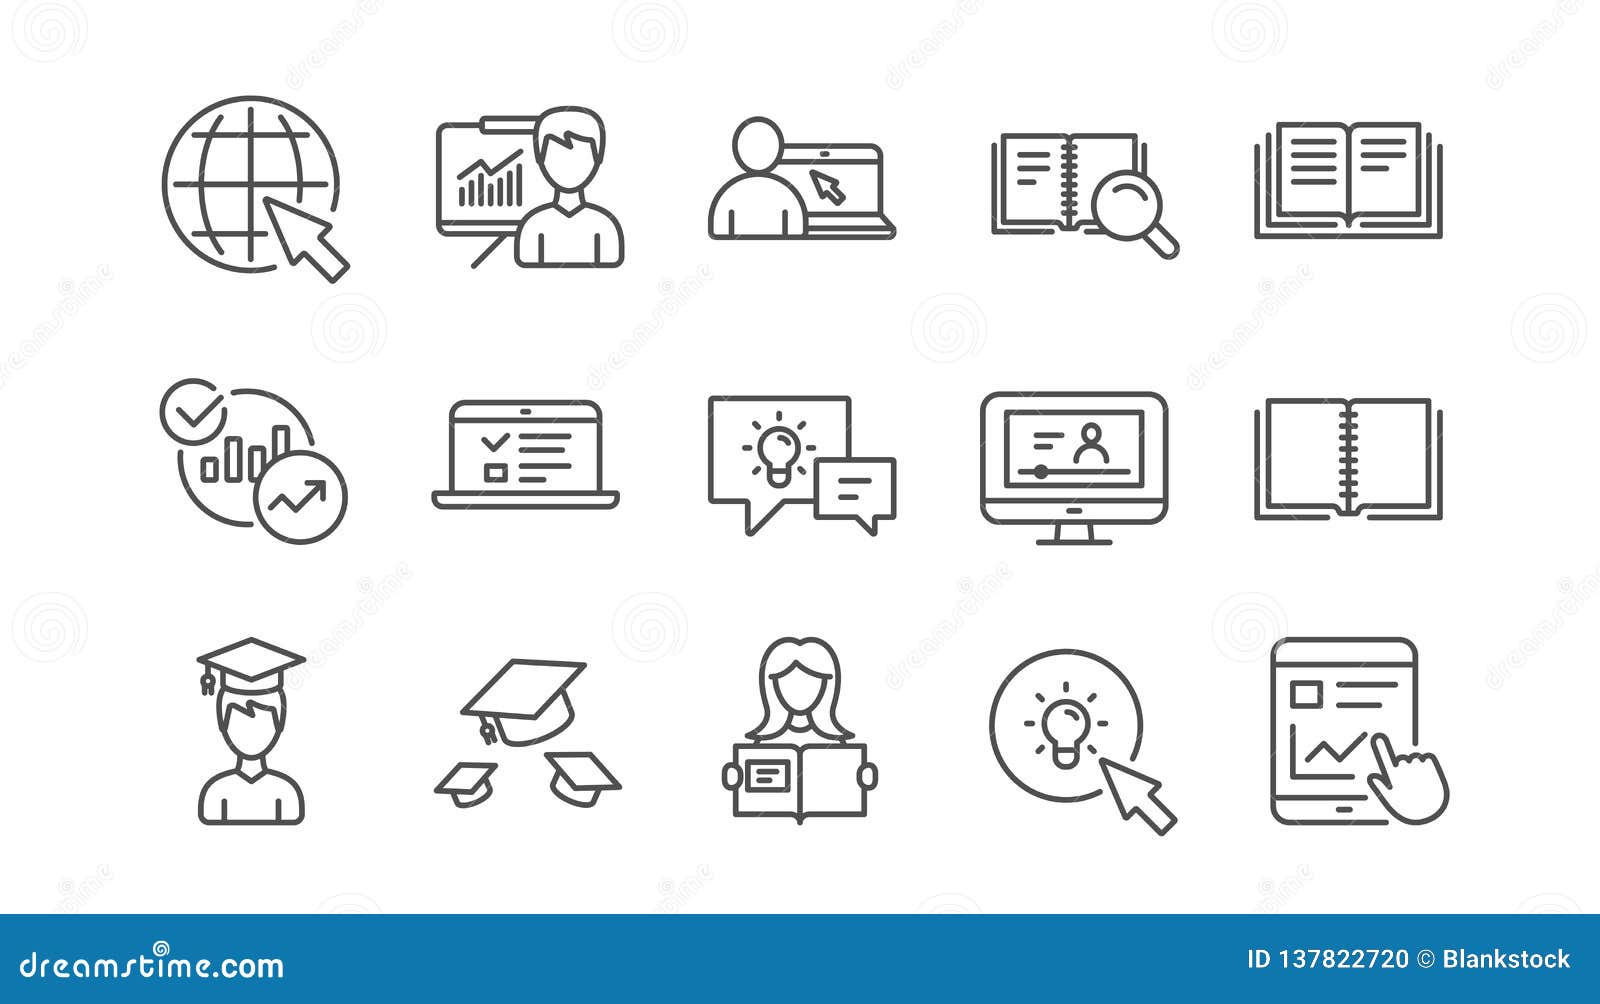 education line icons. book, video tutorial and instructions. linear icon set. 